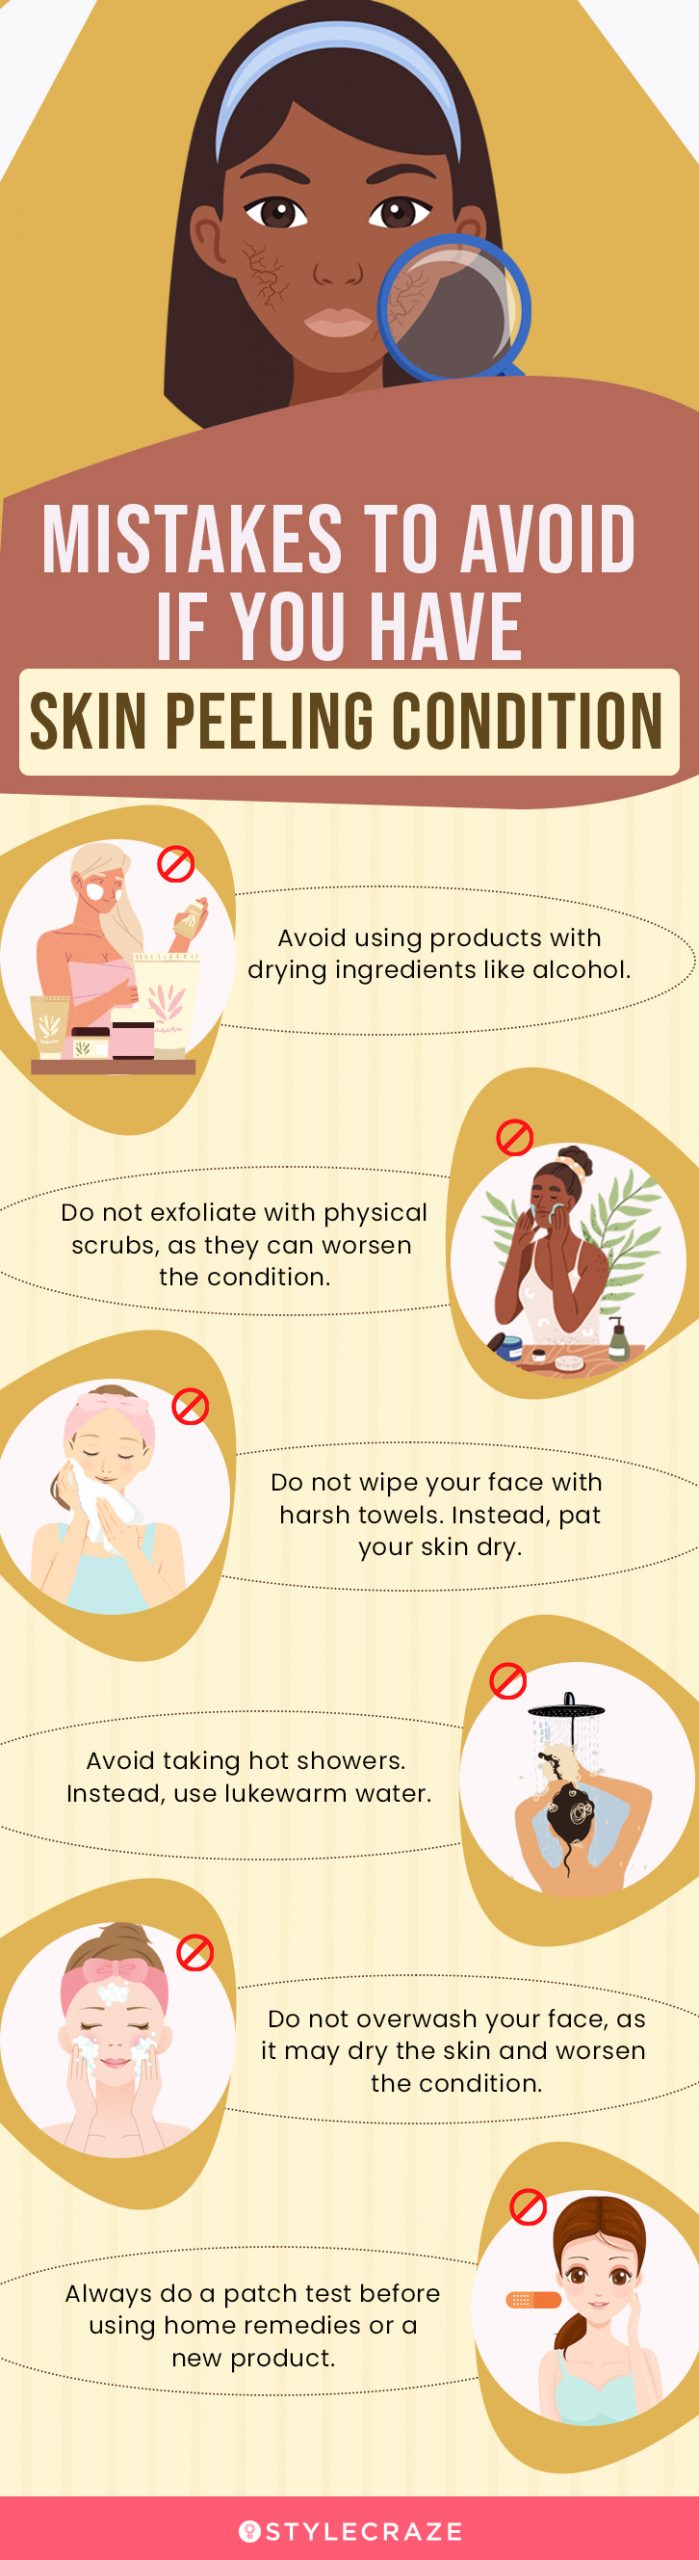 mistakes to avoid if you have skin peeling condition [infographic]